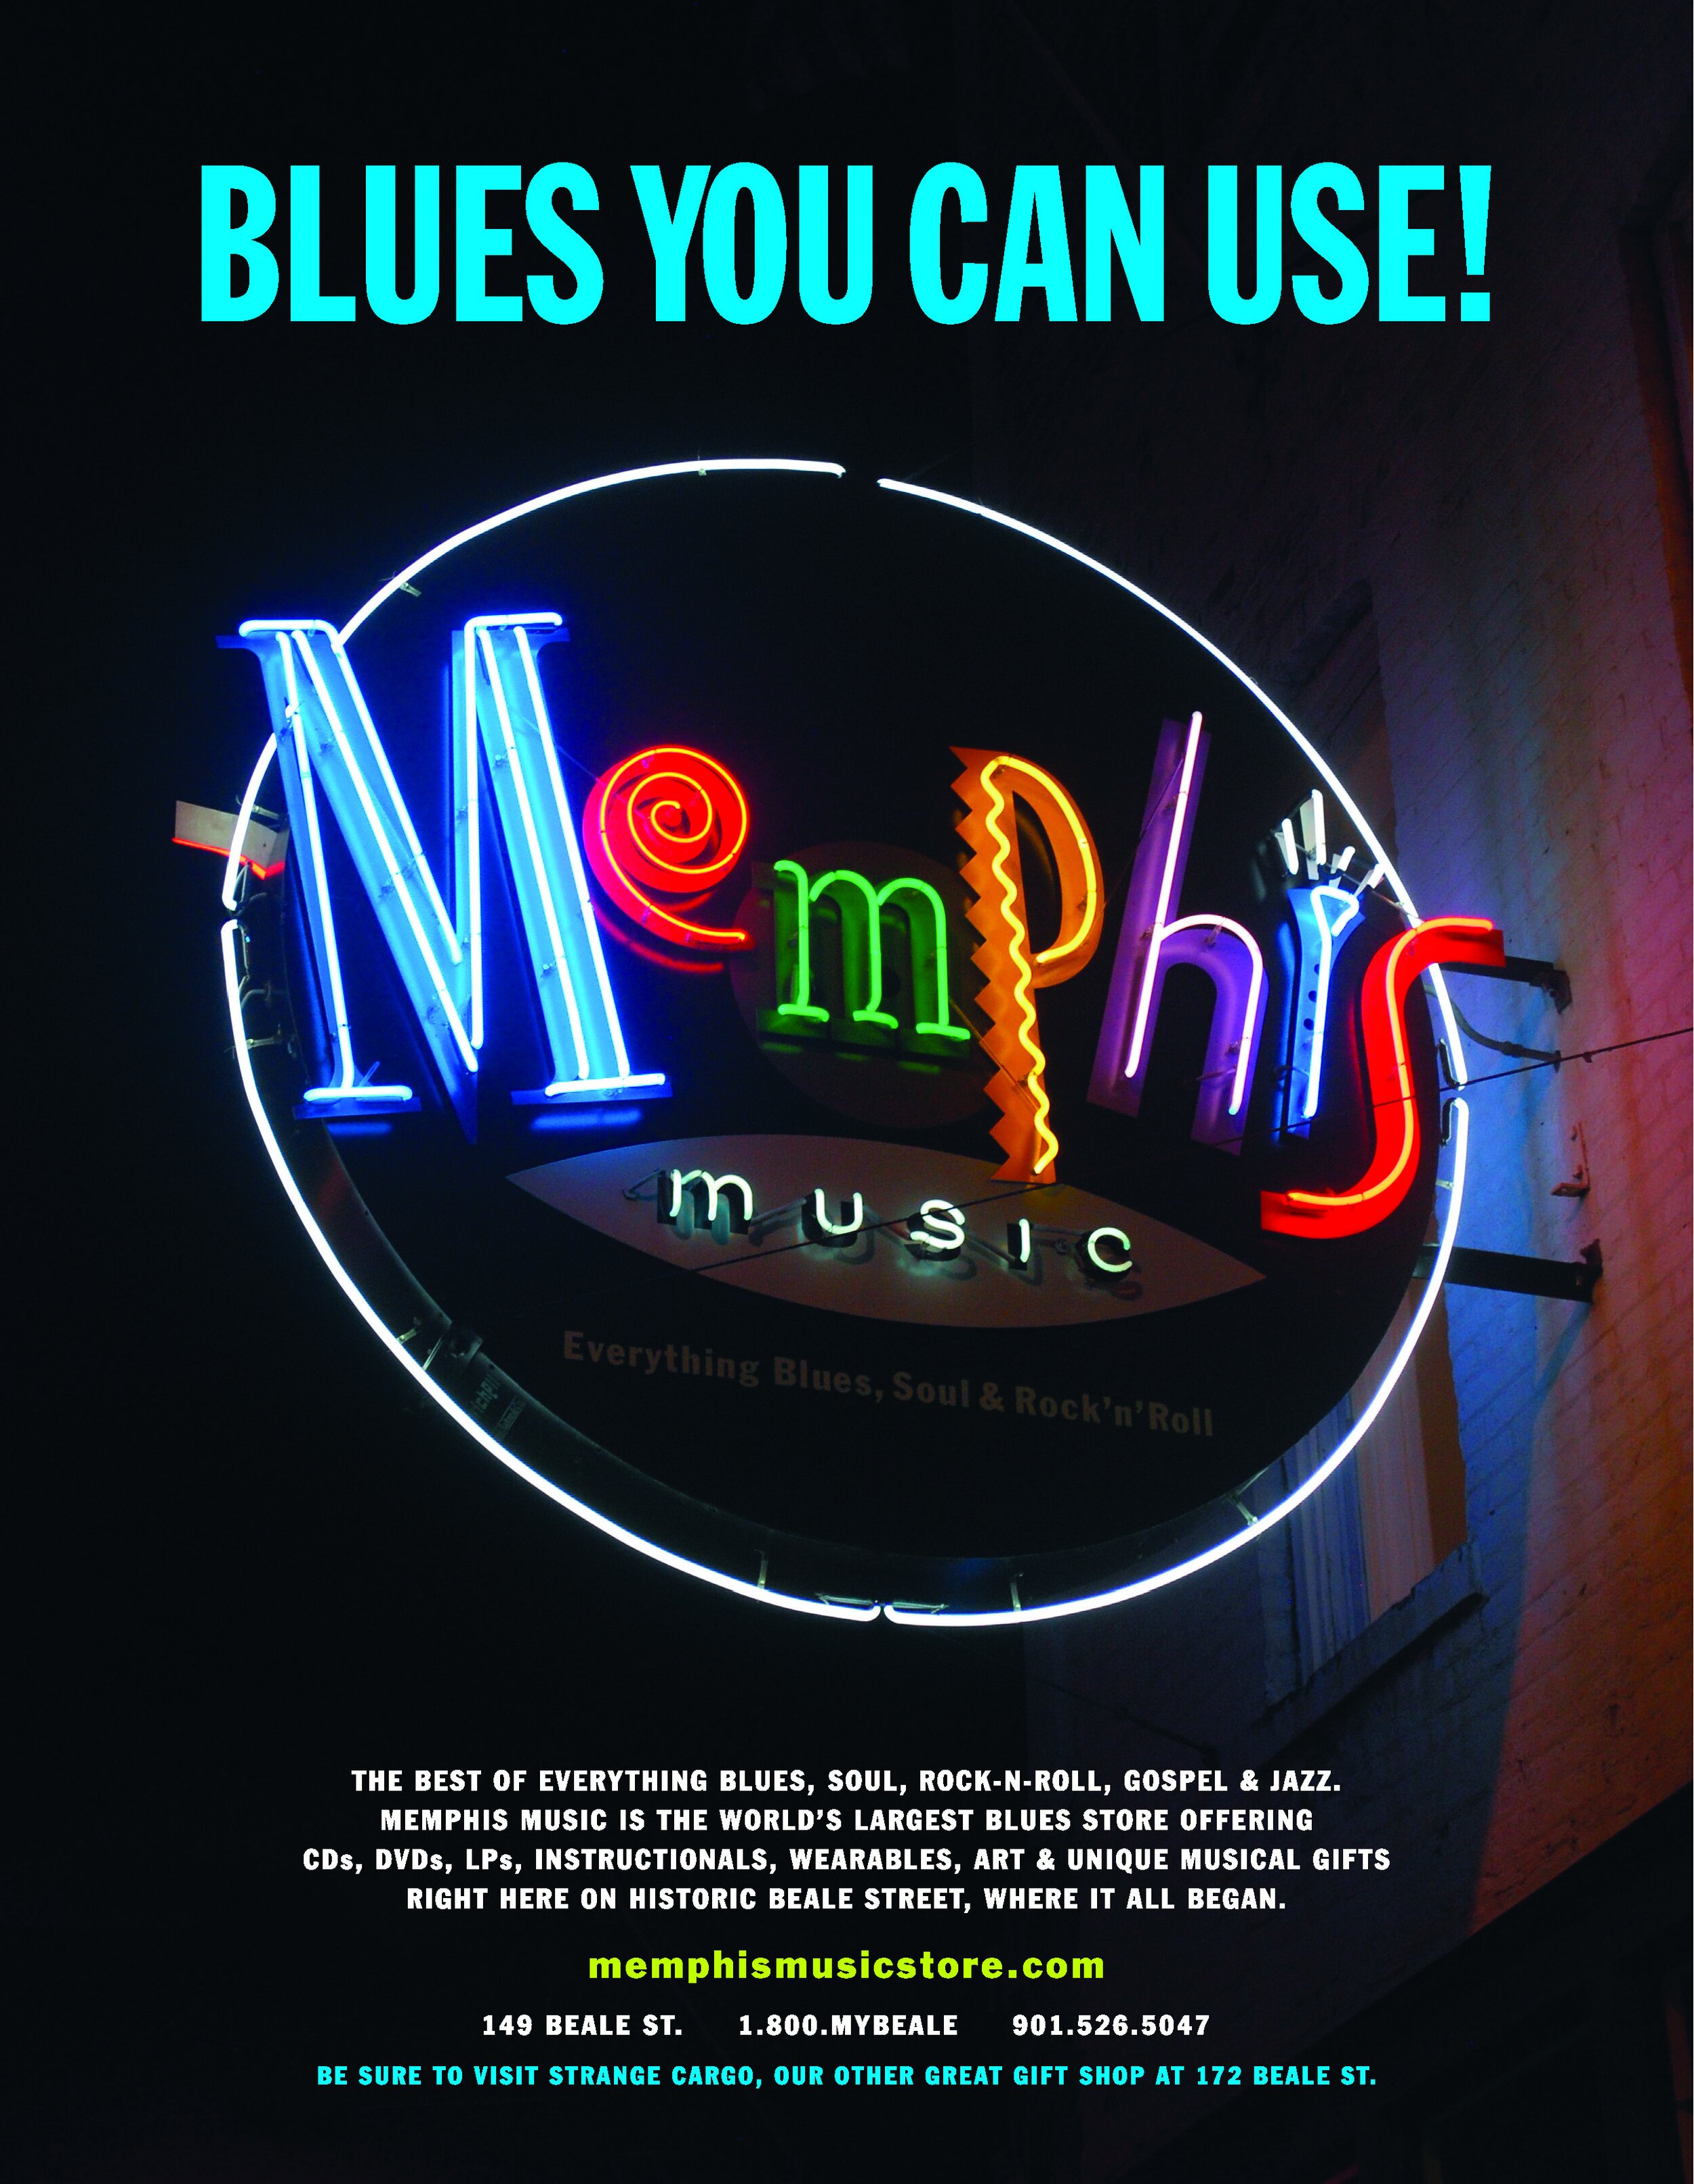  Memphis Music BLUES YOU CAN USE ad  Memphis Grizzlies program ad  Branding creative and design by Chuck Mitchell  “Everything Blues” tag-line by Chuck Mitchell  Memphis Music Store  Beale Street Memphis, Tennessee   